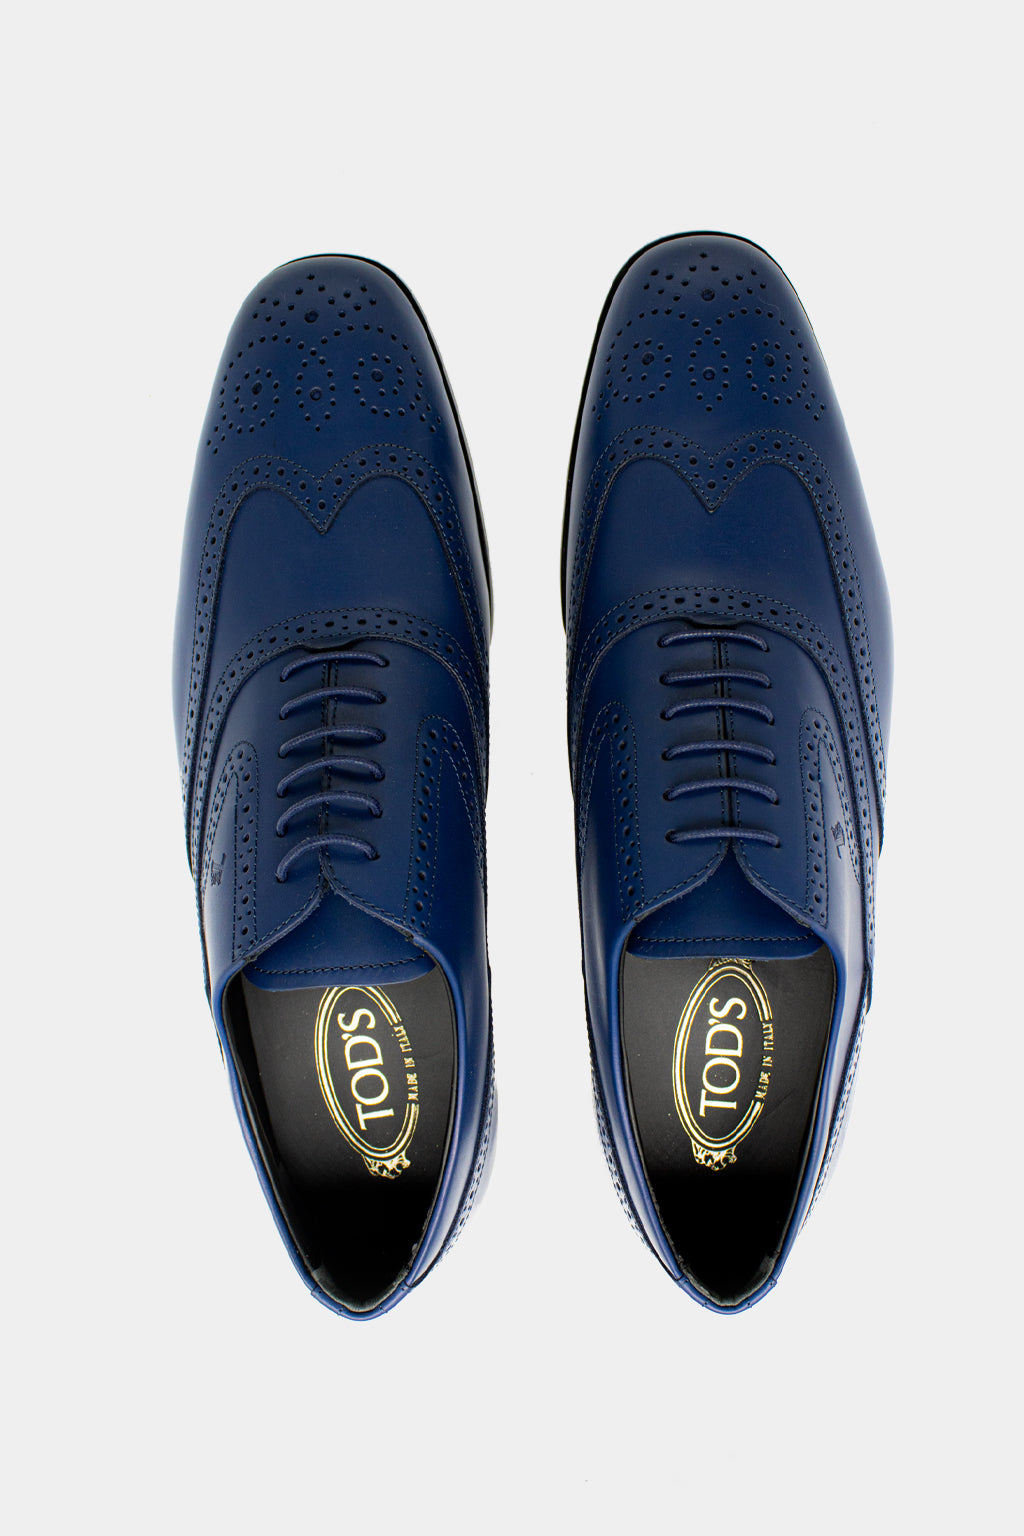 Tod's - Men's Perforated Leather Lace-Up Oxford Shoes